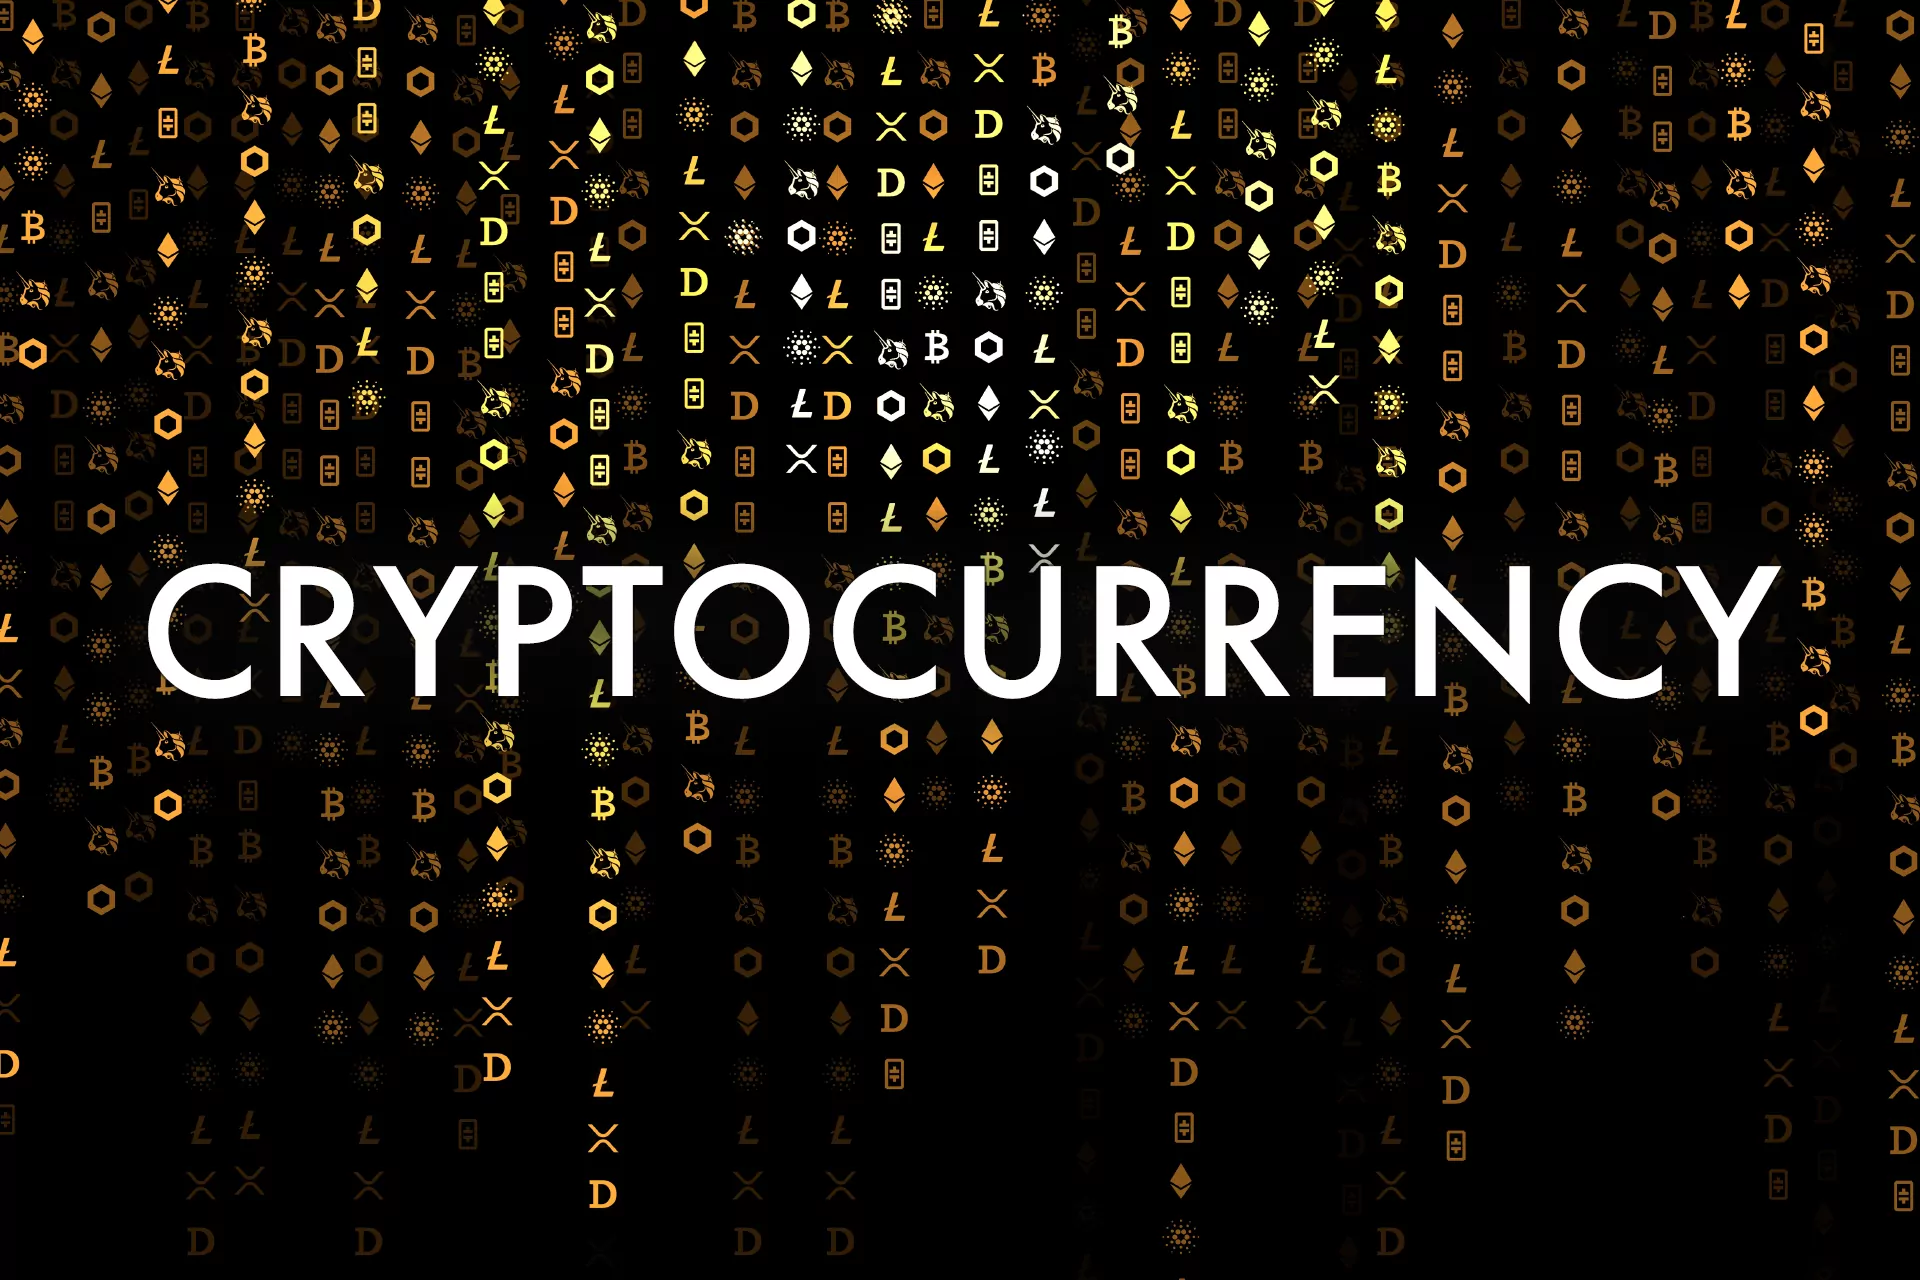 If you want to hide your transactions, you should use cryptocurrency wallets to top up your betting accounts.